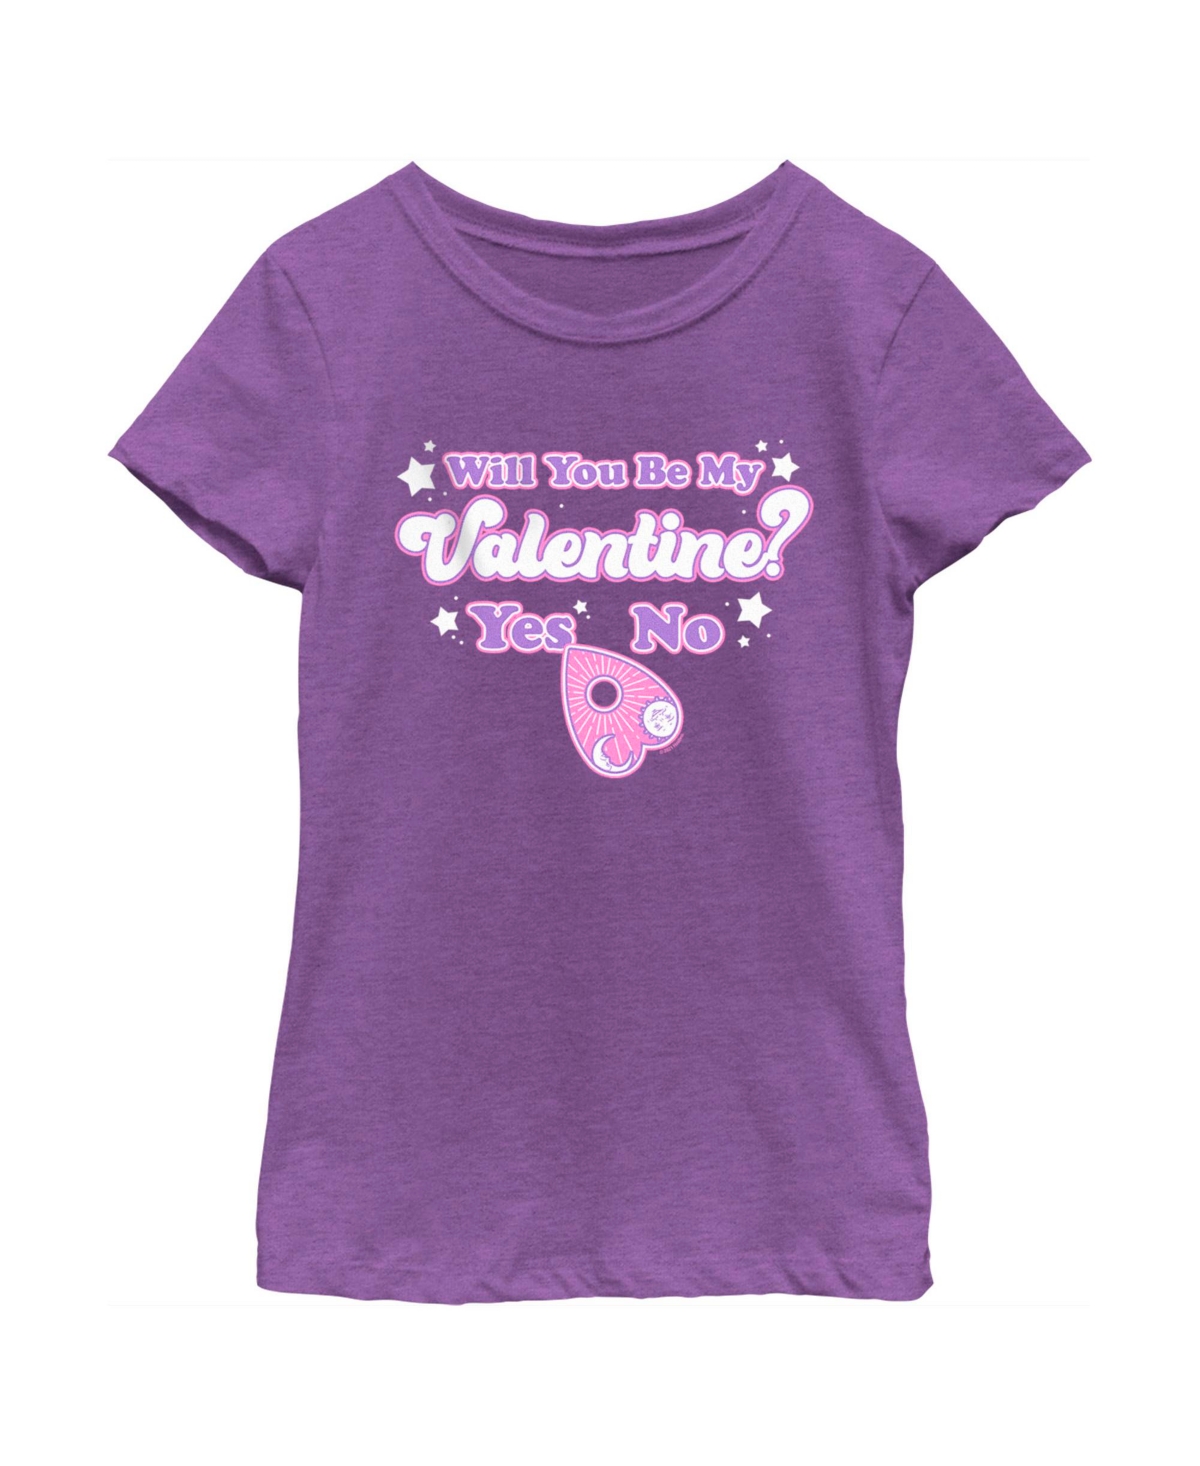 Hasbro Kids' Girl's Ouija Will You Be My Valentine? Yes Or No? Child T-shirt In Purple Berry